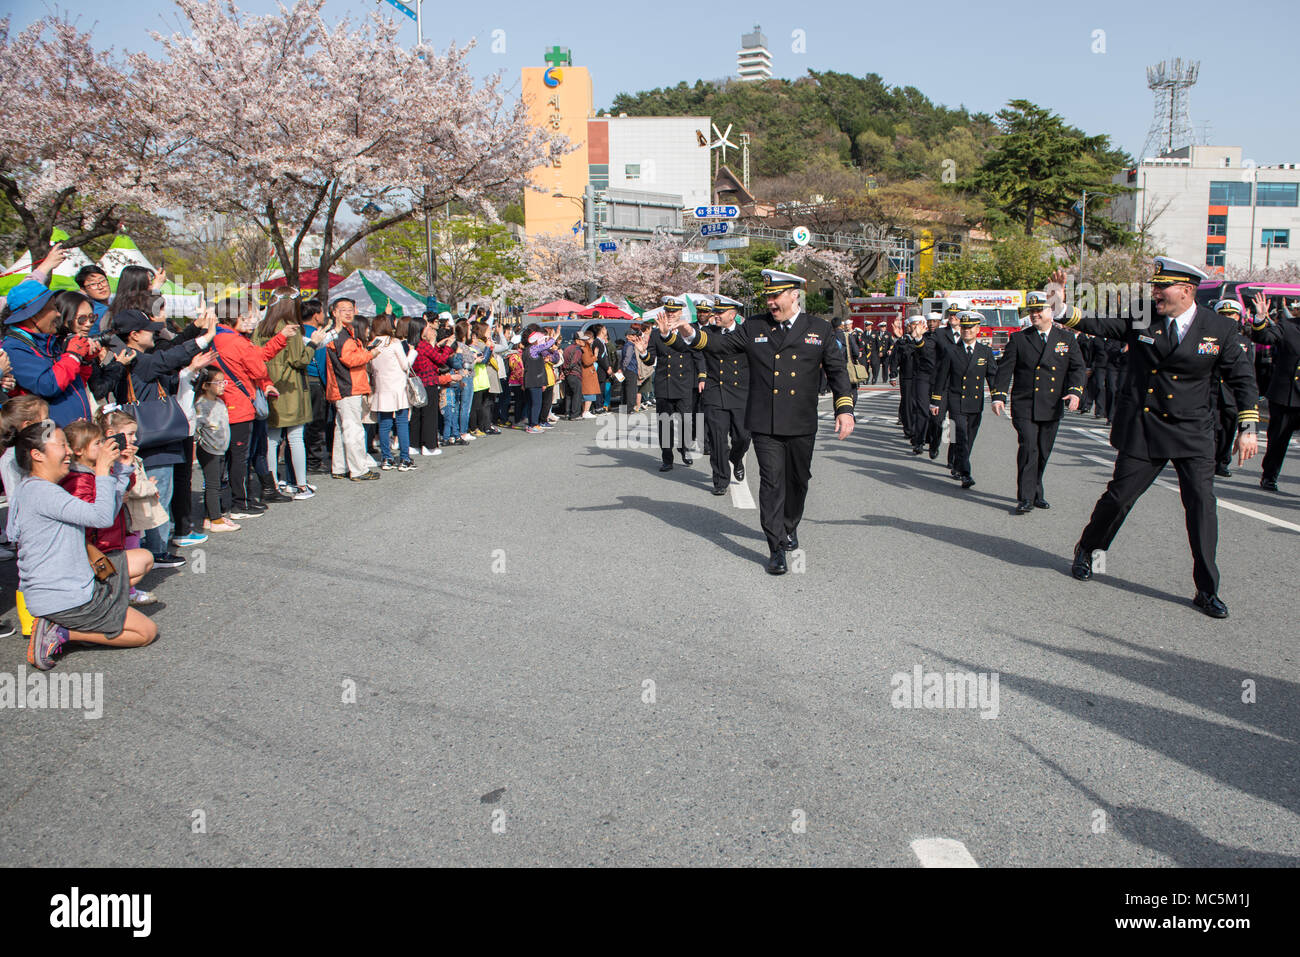 180406-N-TB148-392 CHINHAE, Republic of Korea (April 06, 2018) Sailors assigned to Commander, Fleet Activities Chinhae (CFAC), and Commander, U.S. Naval Forces Korea (CNFK) participate in the Jinhae Military Parade Festival also known as the Jinhae Cherry Blossom Festival in Changwon. Commemorating famed ROK naval hero Admiral Yi Sun-shin the ten-day festival coincides with the annual cherry blossom bloom which attracts over 2 million visitors. (U.S. Navy photo by Mass Communication Specialist Seaman William Carlisle) Stock Photo